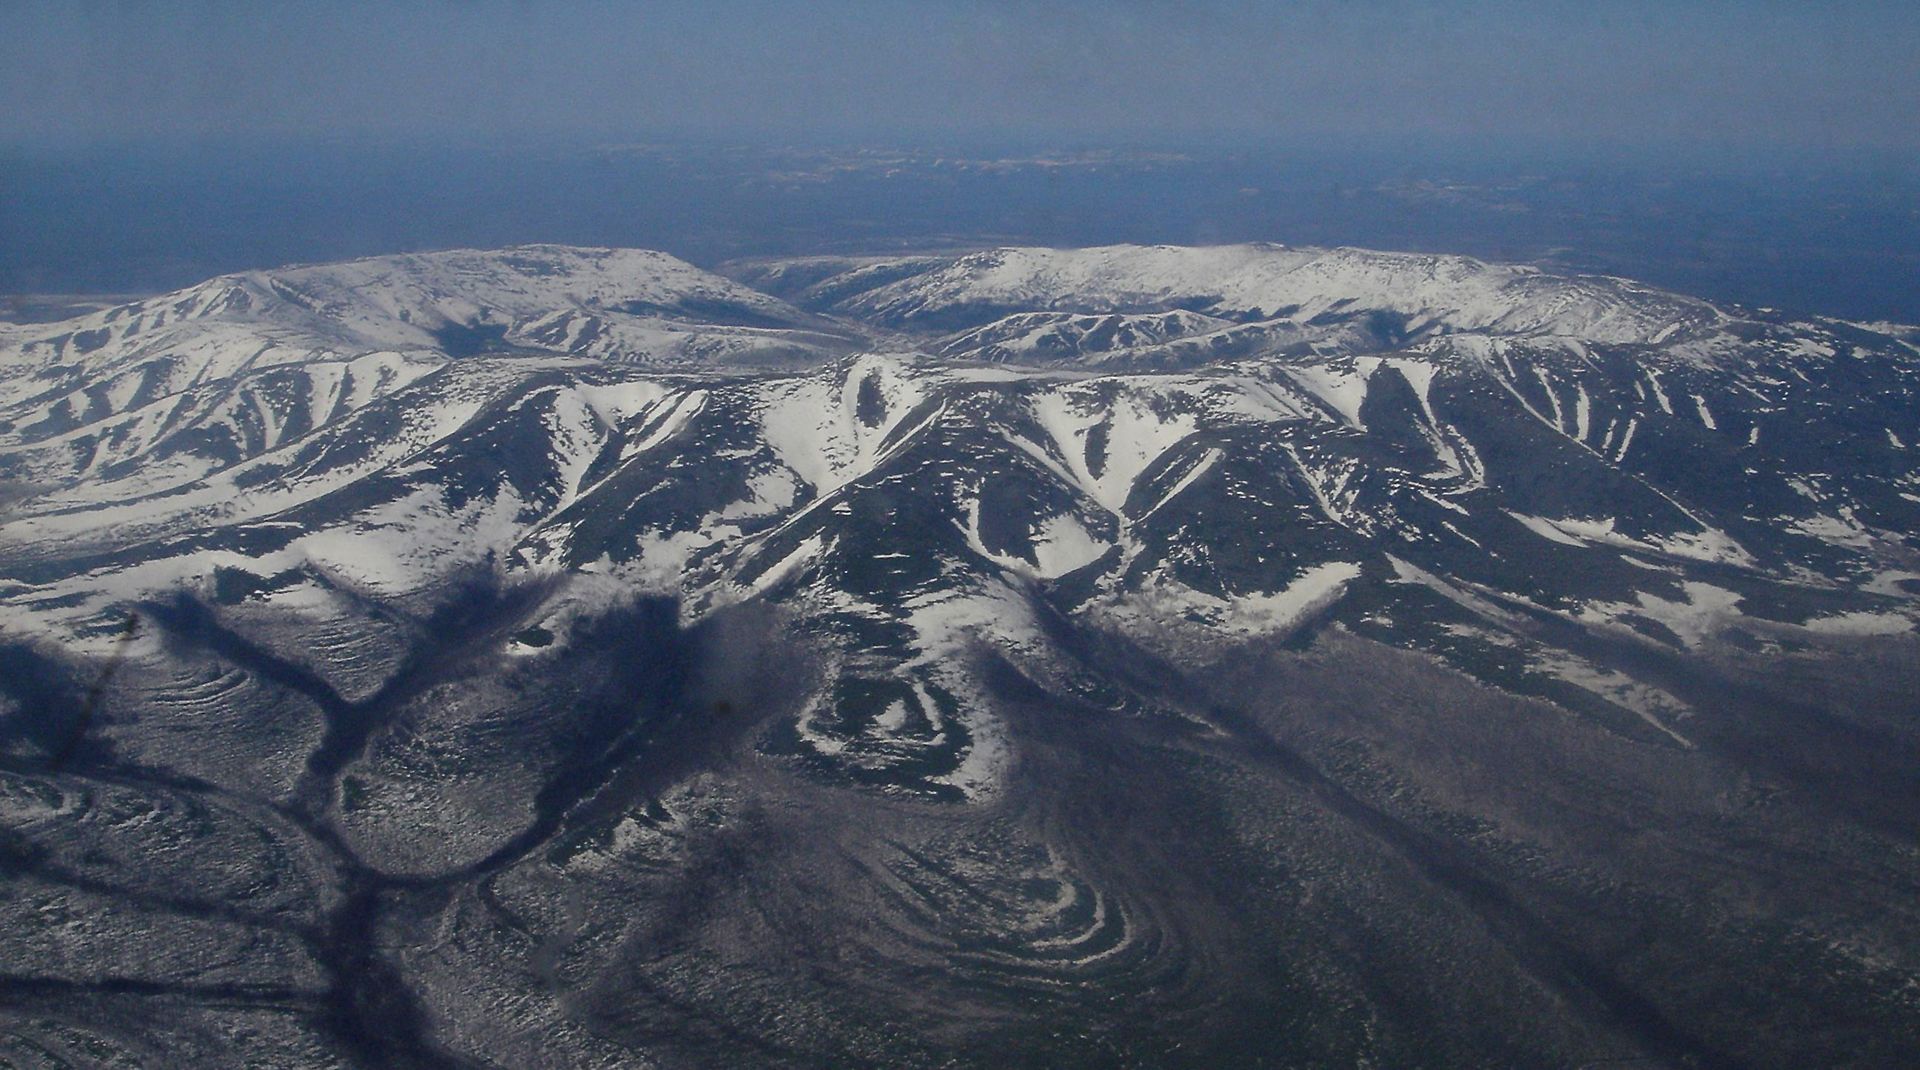 Kondyor Massif viewed from a helicopter